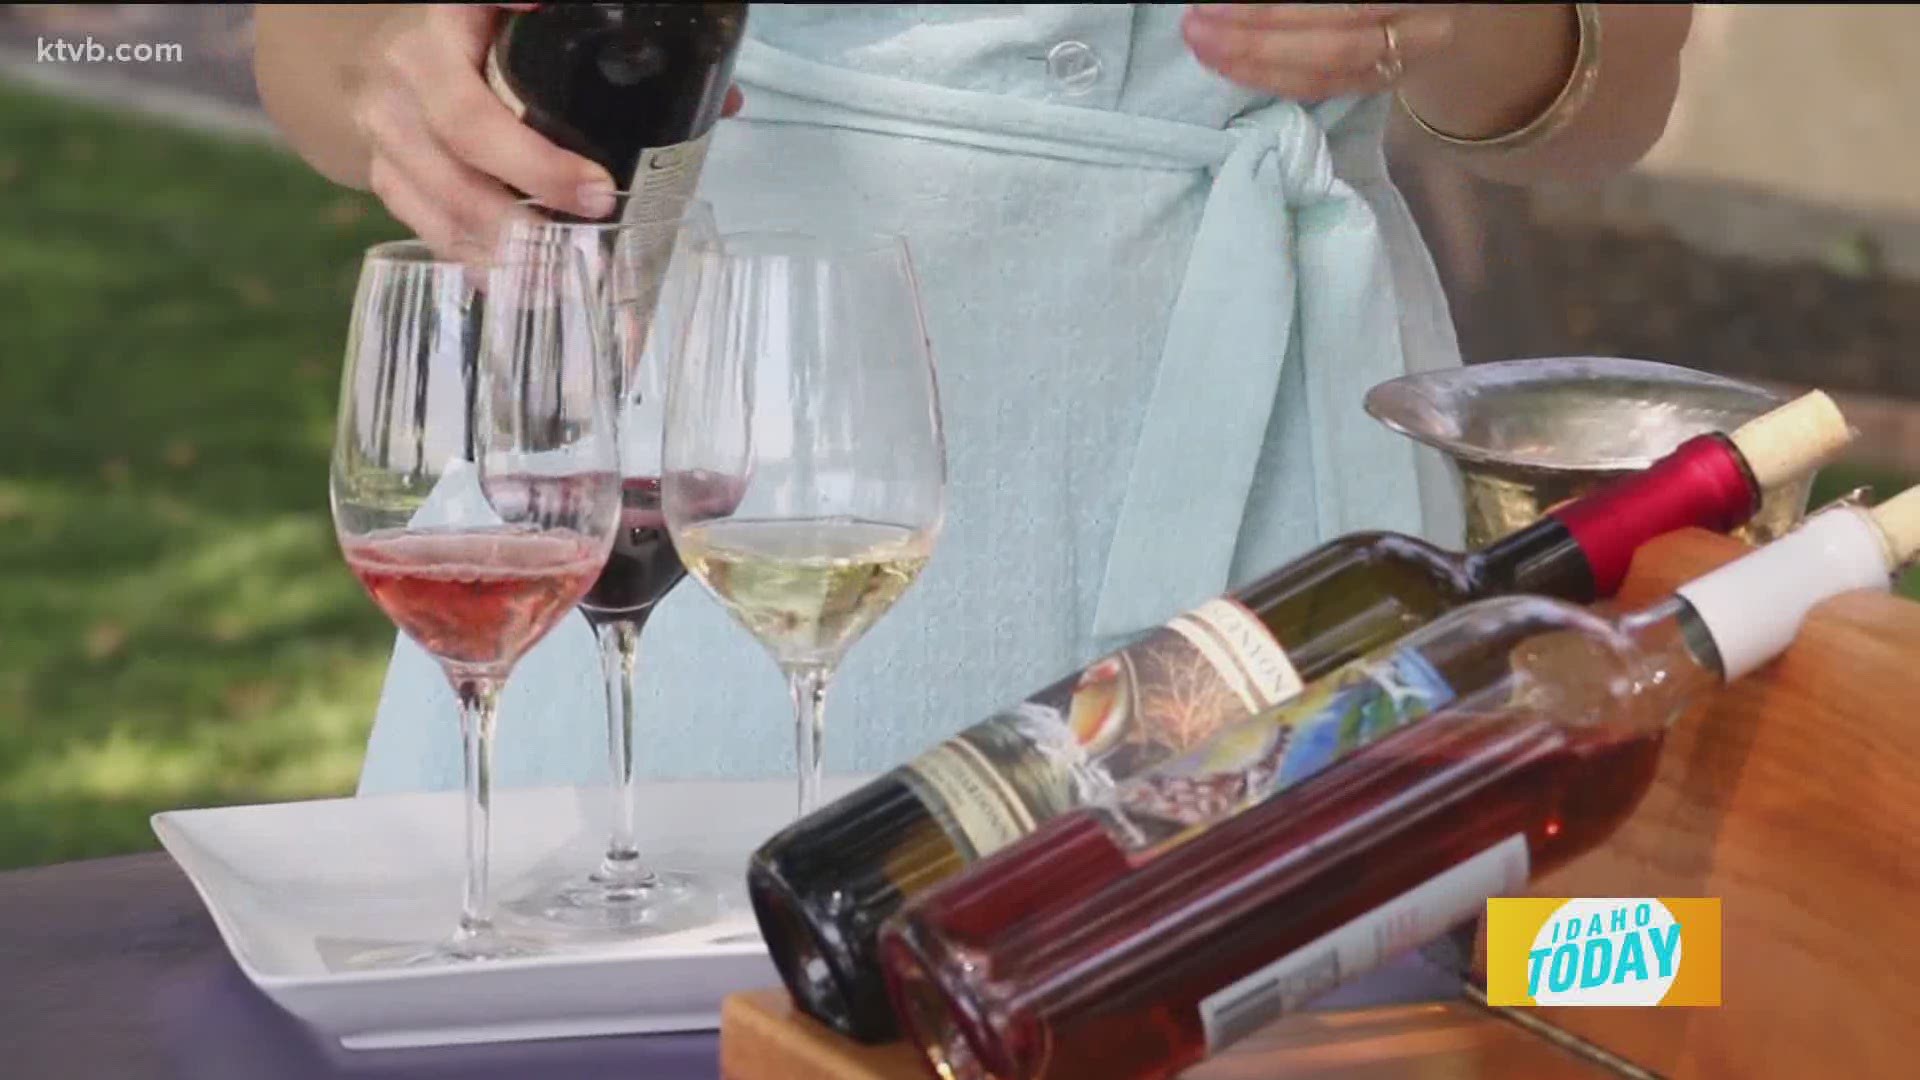 Hadley Robertson with Hells Canyon Winery walks us through a wine tasting and what to look for.